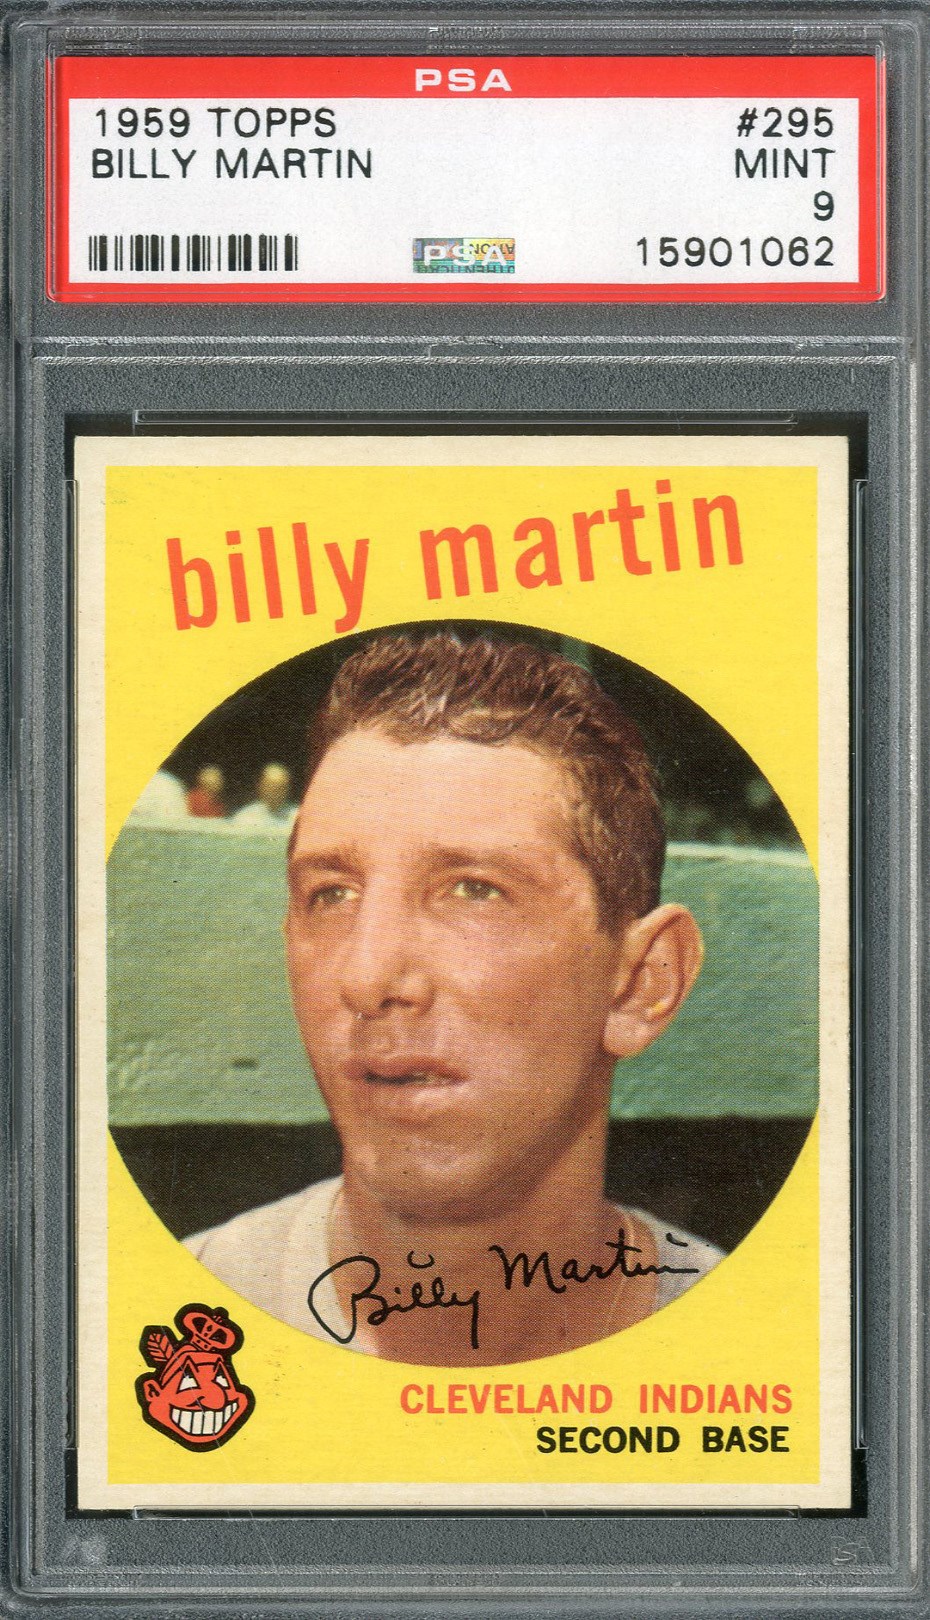 Baseball and Trading Cards - 1959 Topps #295 Billy Martin PSA MINT 9